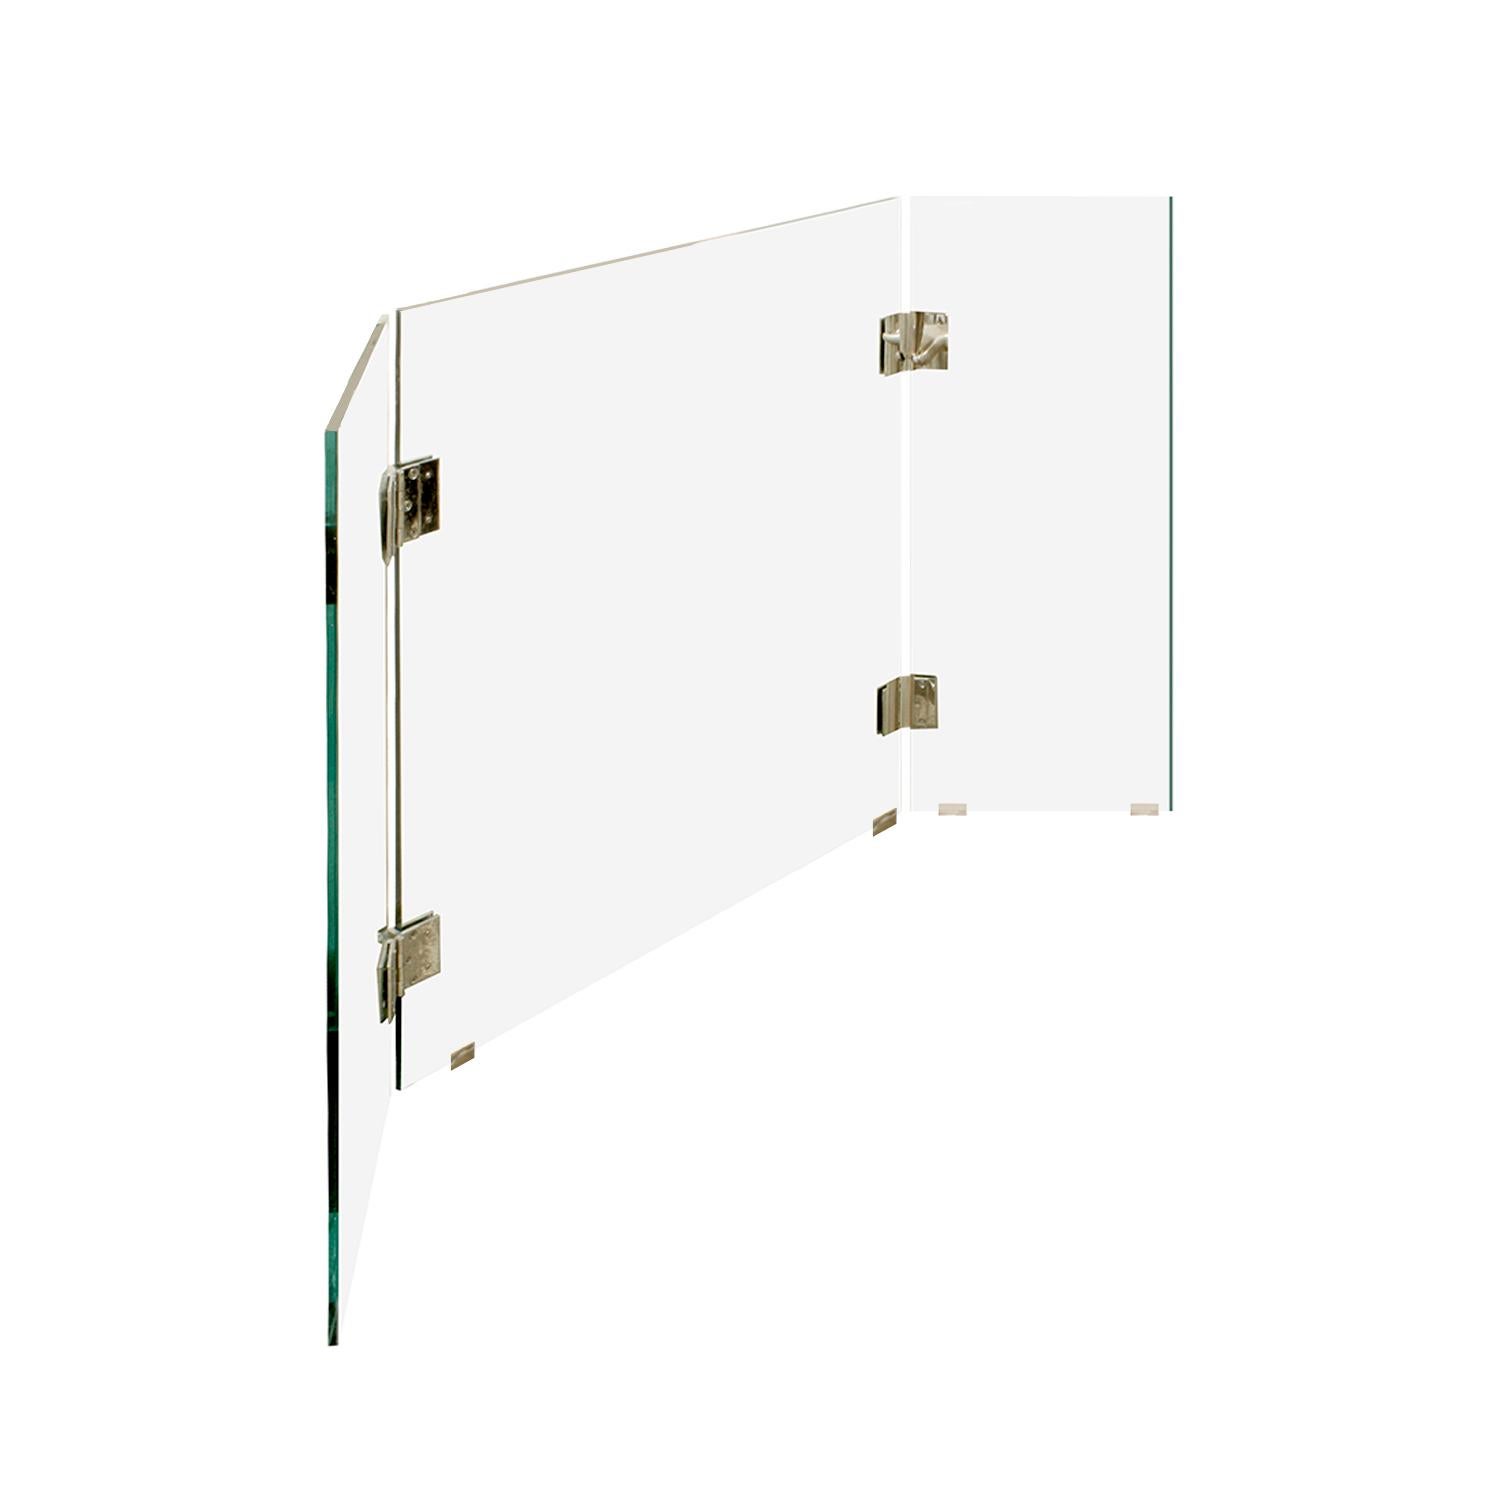 Fire screen model #1982-C in glass with chrome hinges and feet by Danny Allessandro and sold through Holly Hunt, American, 1980s.